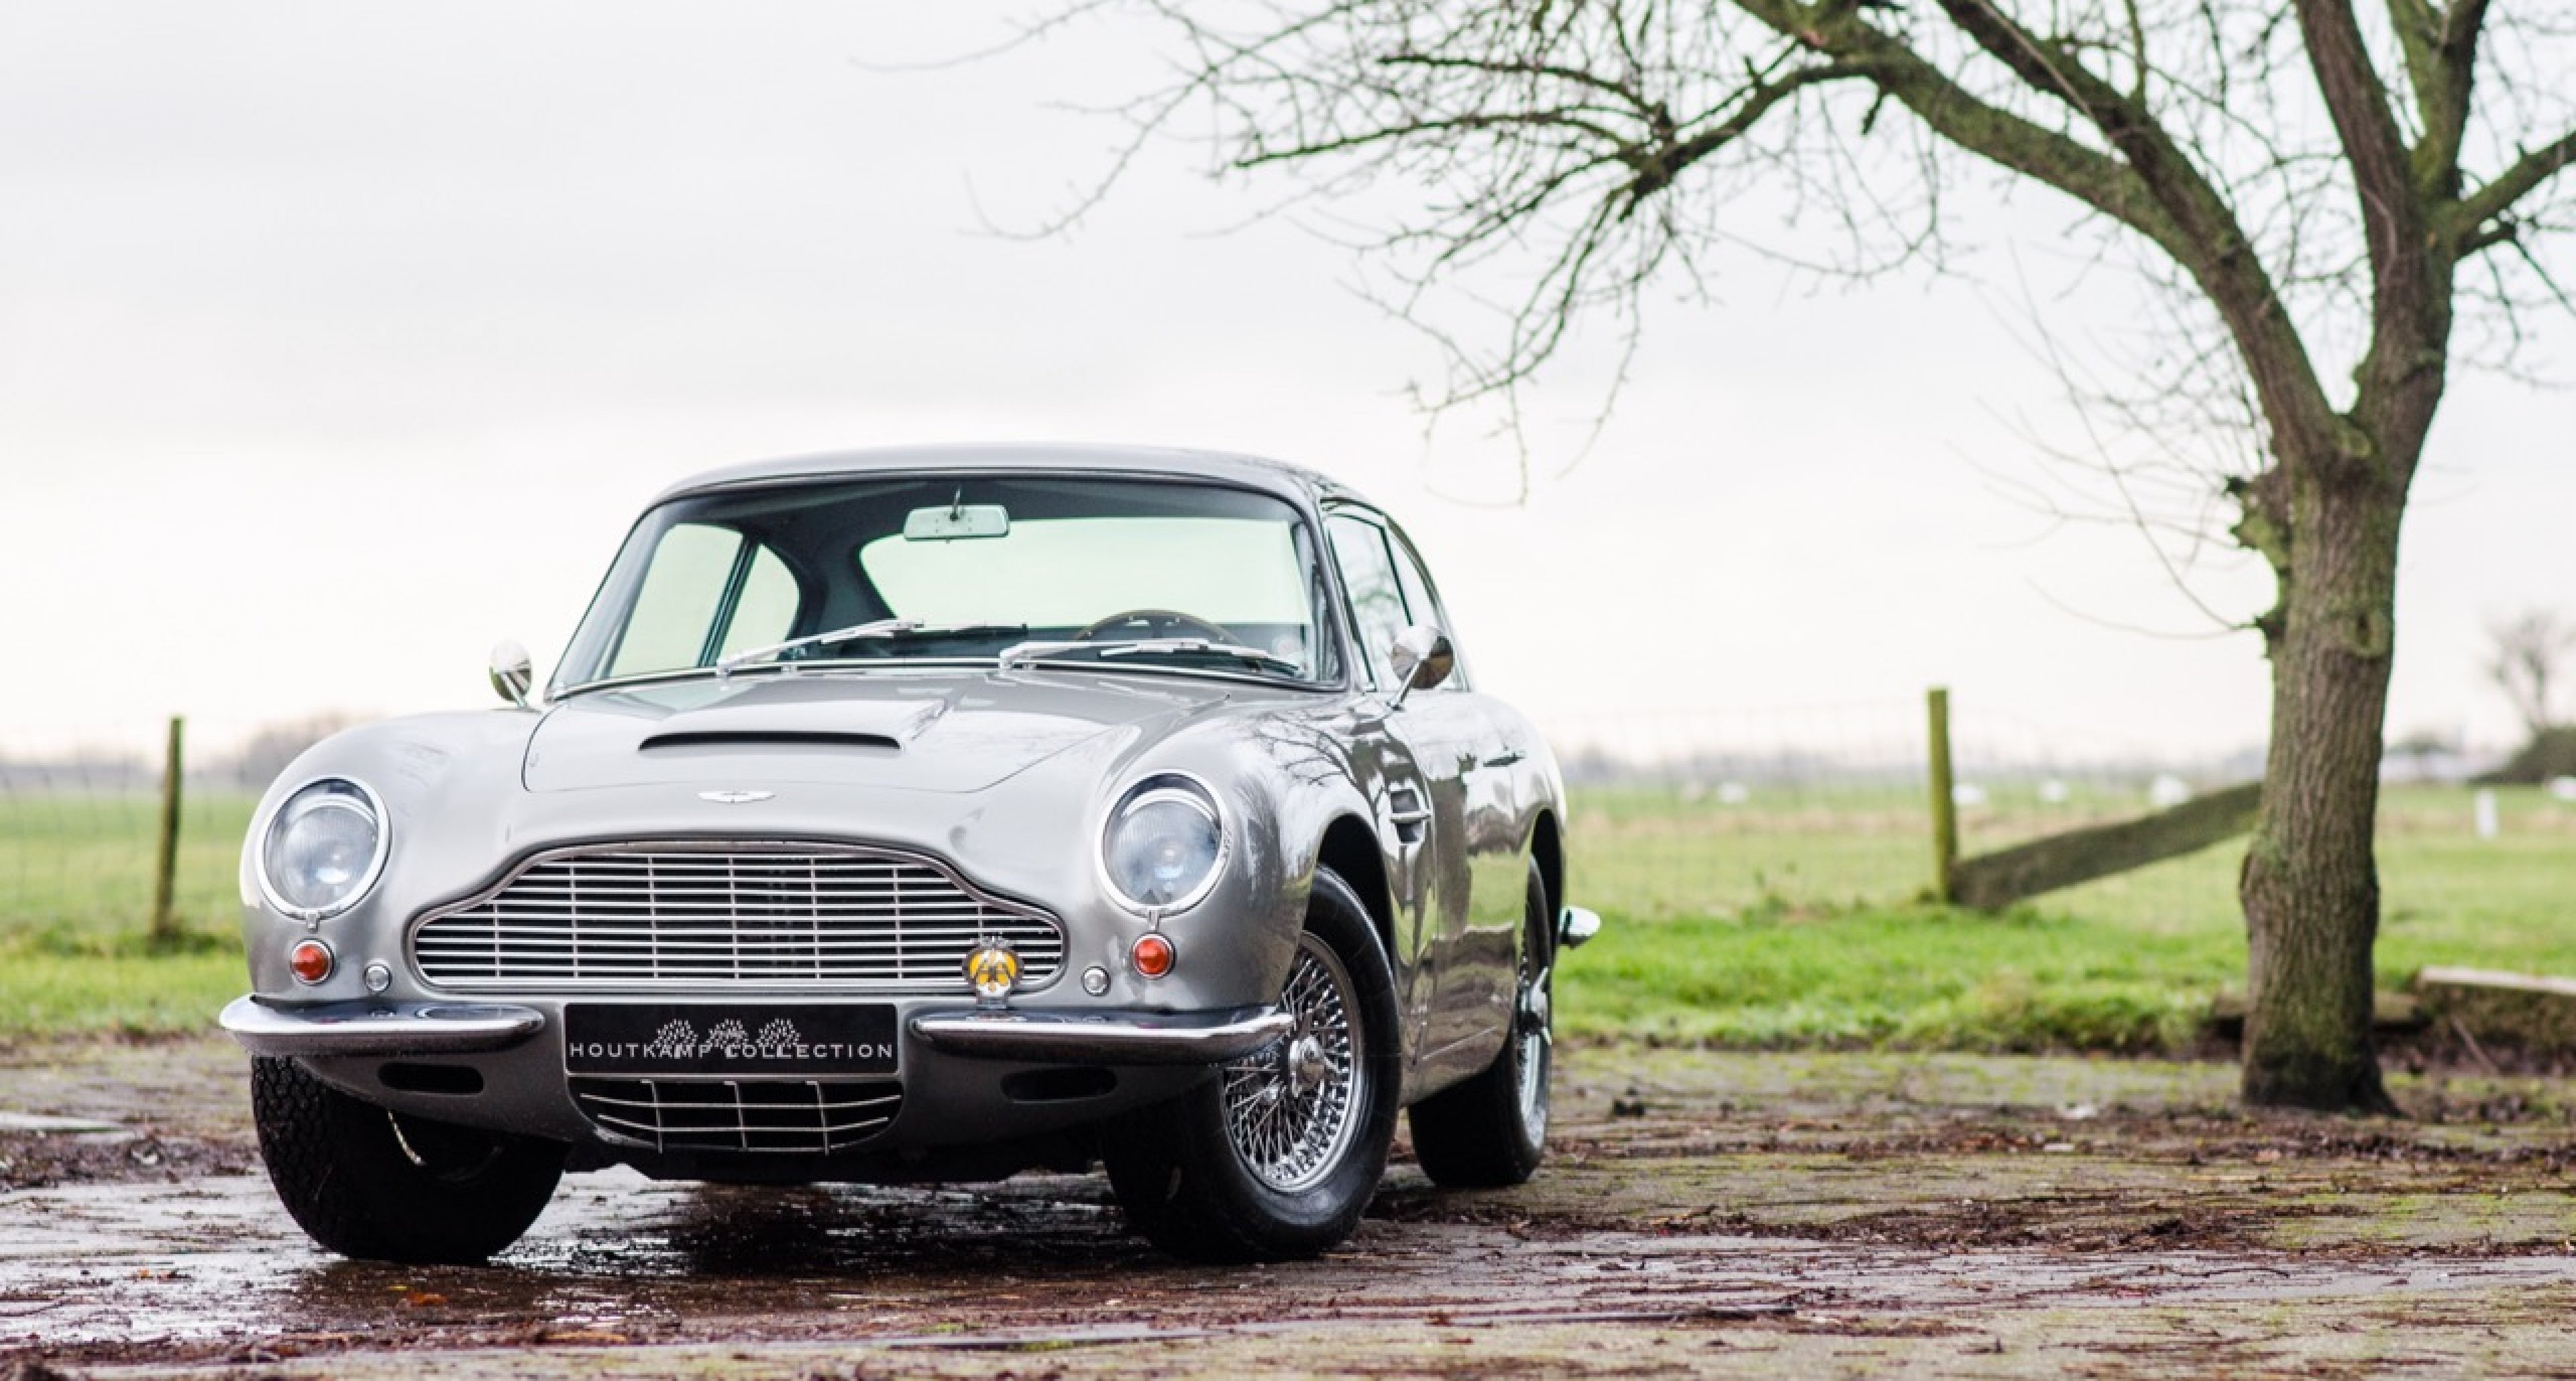 Aston Martin Db4 Db5 And Db6 The Big Picture